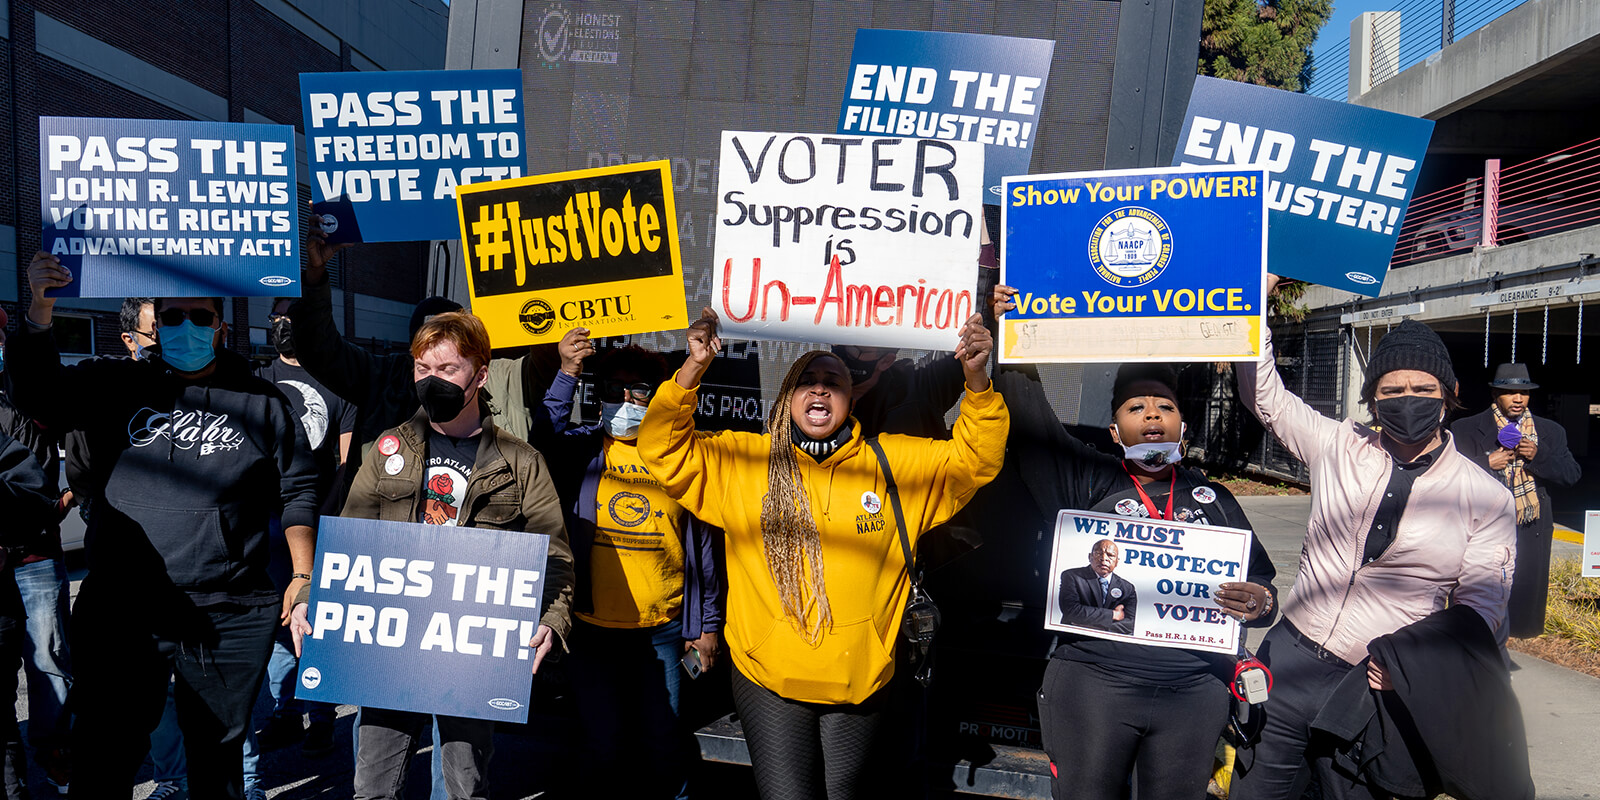 With democracy at stake, Congress must pass voting rights legislation